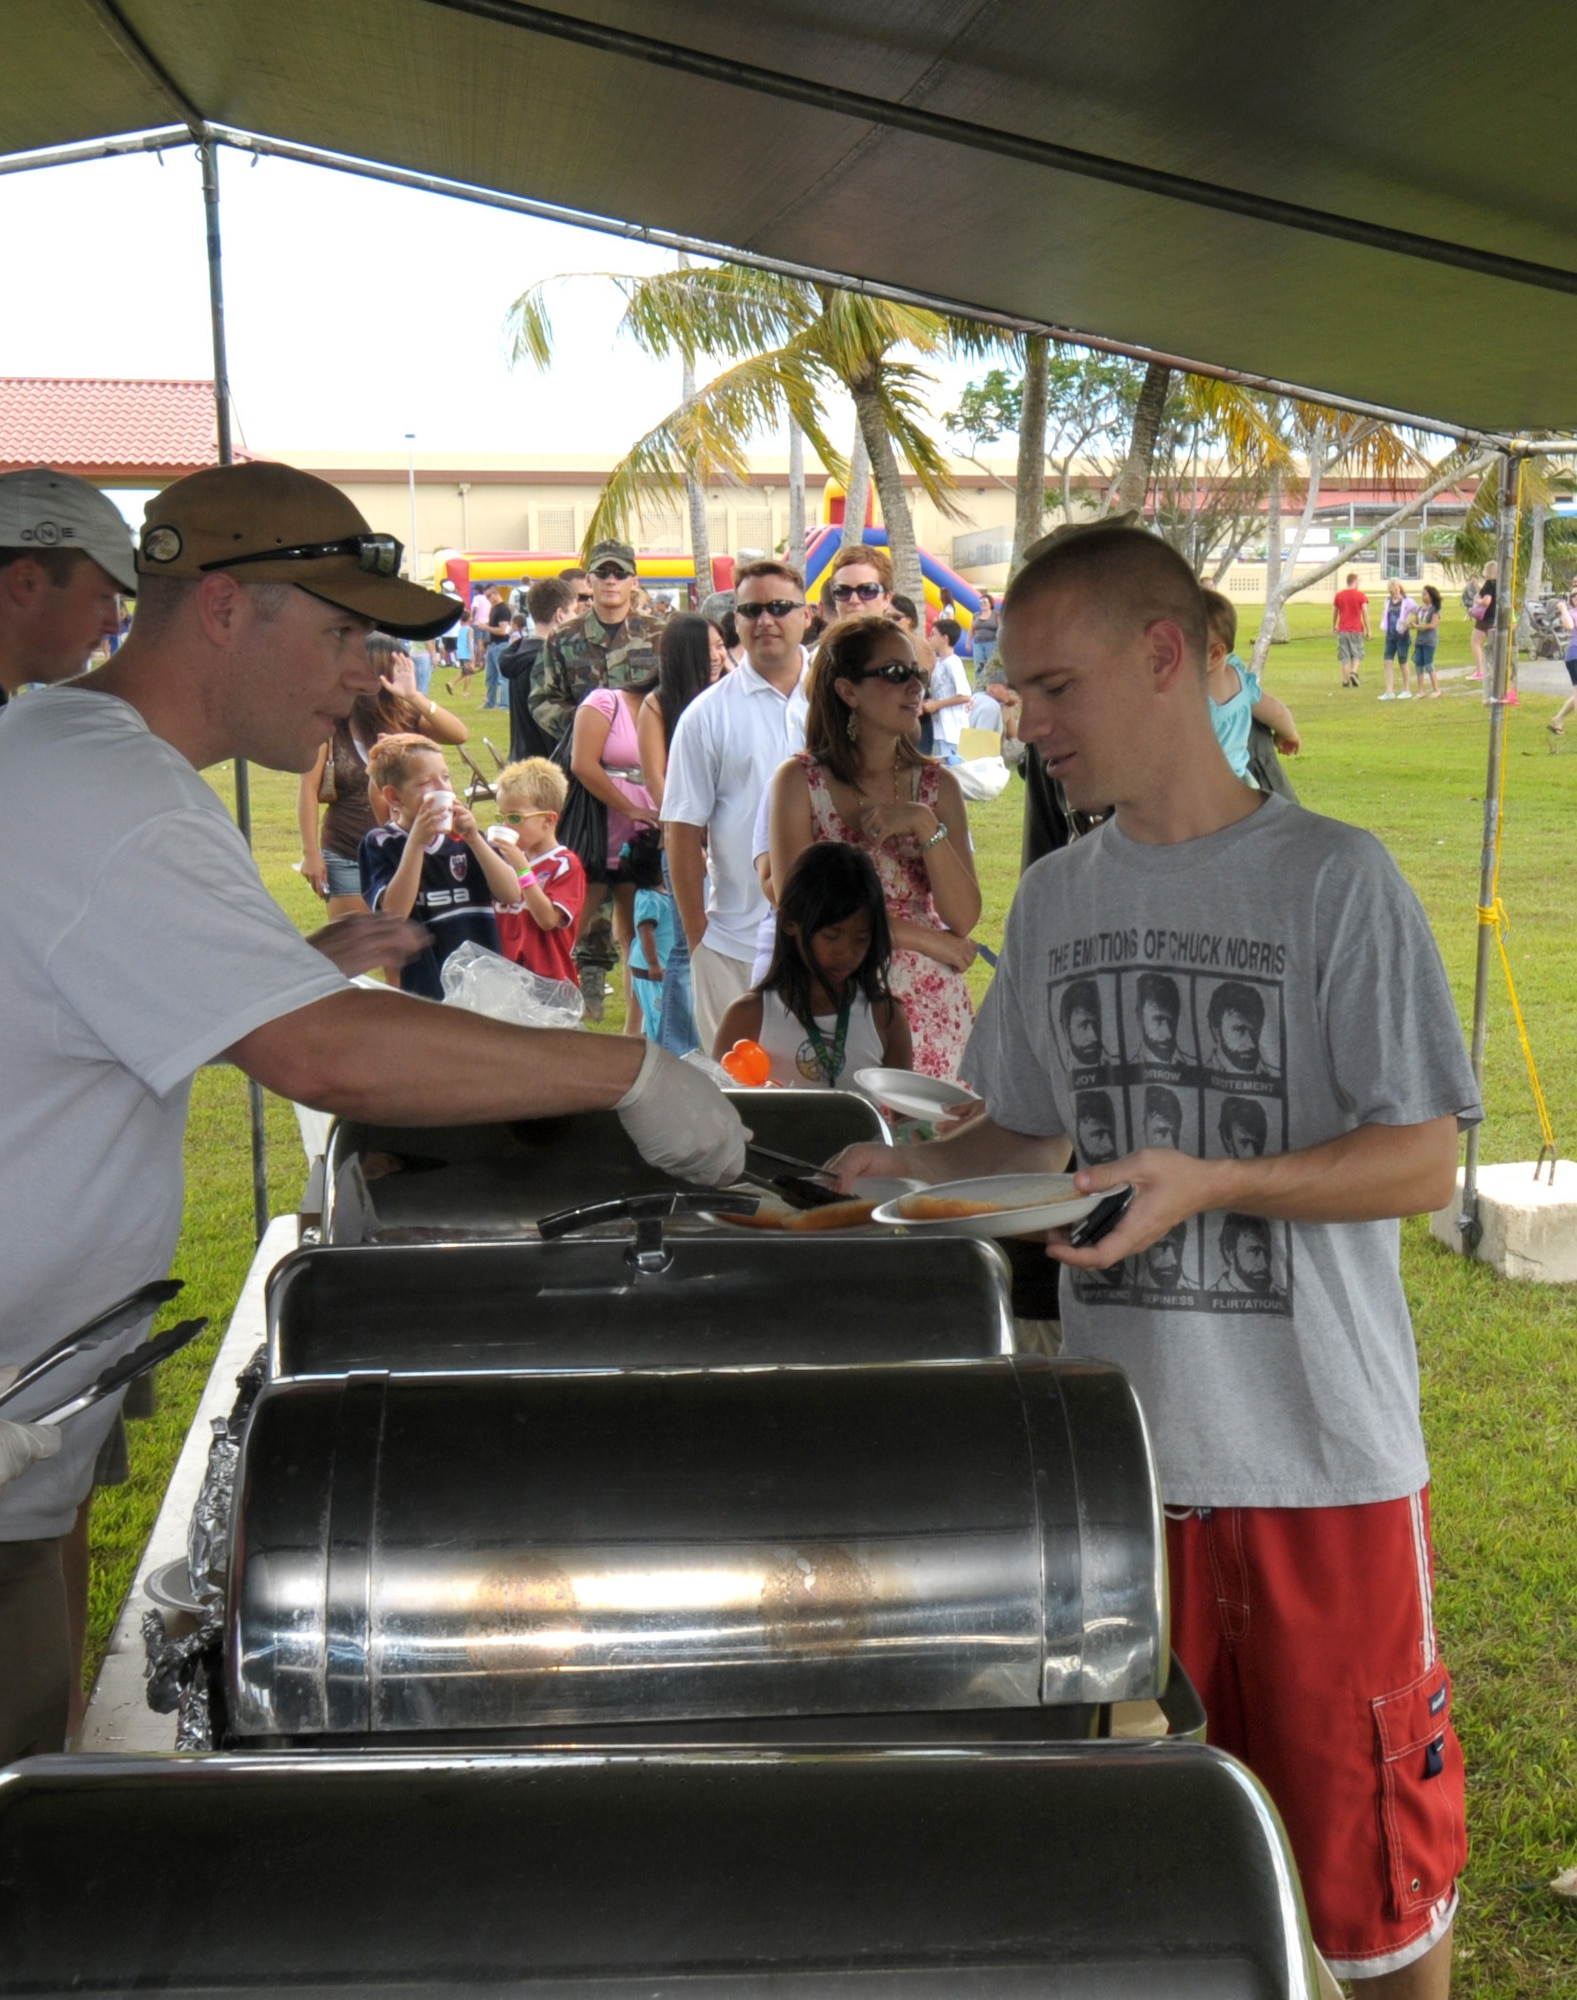 ANDERSEN AIR FORCE BASE, Guam  Staff Sgt. Timothy Milton, Buckley Air Force Base, Colo., serves up free burgers to Tech Sgt. Jason Trickey, 36th Operations Support Squadron, during Andersen's Freedom Fest 2009 here July 2. Other entertainment included live music, horse rides, face painting, a water slide, a bouncy castle, a dunking booth, paintball and pie eating contests. (U.S. Air Force photo by Tech. Sgt. Michael Boquette)